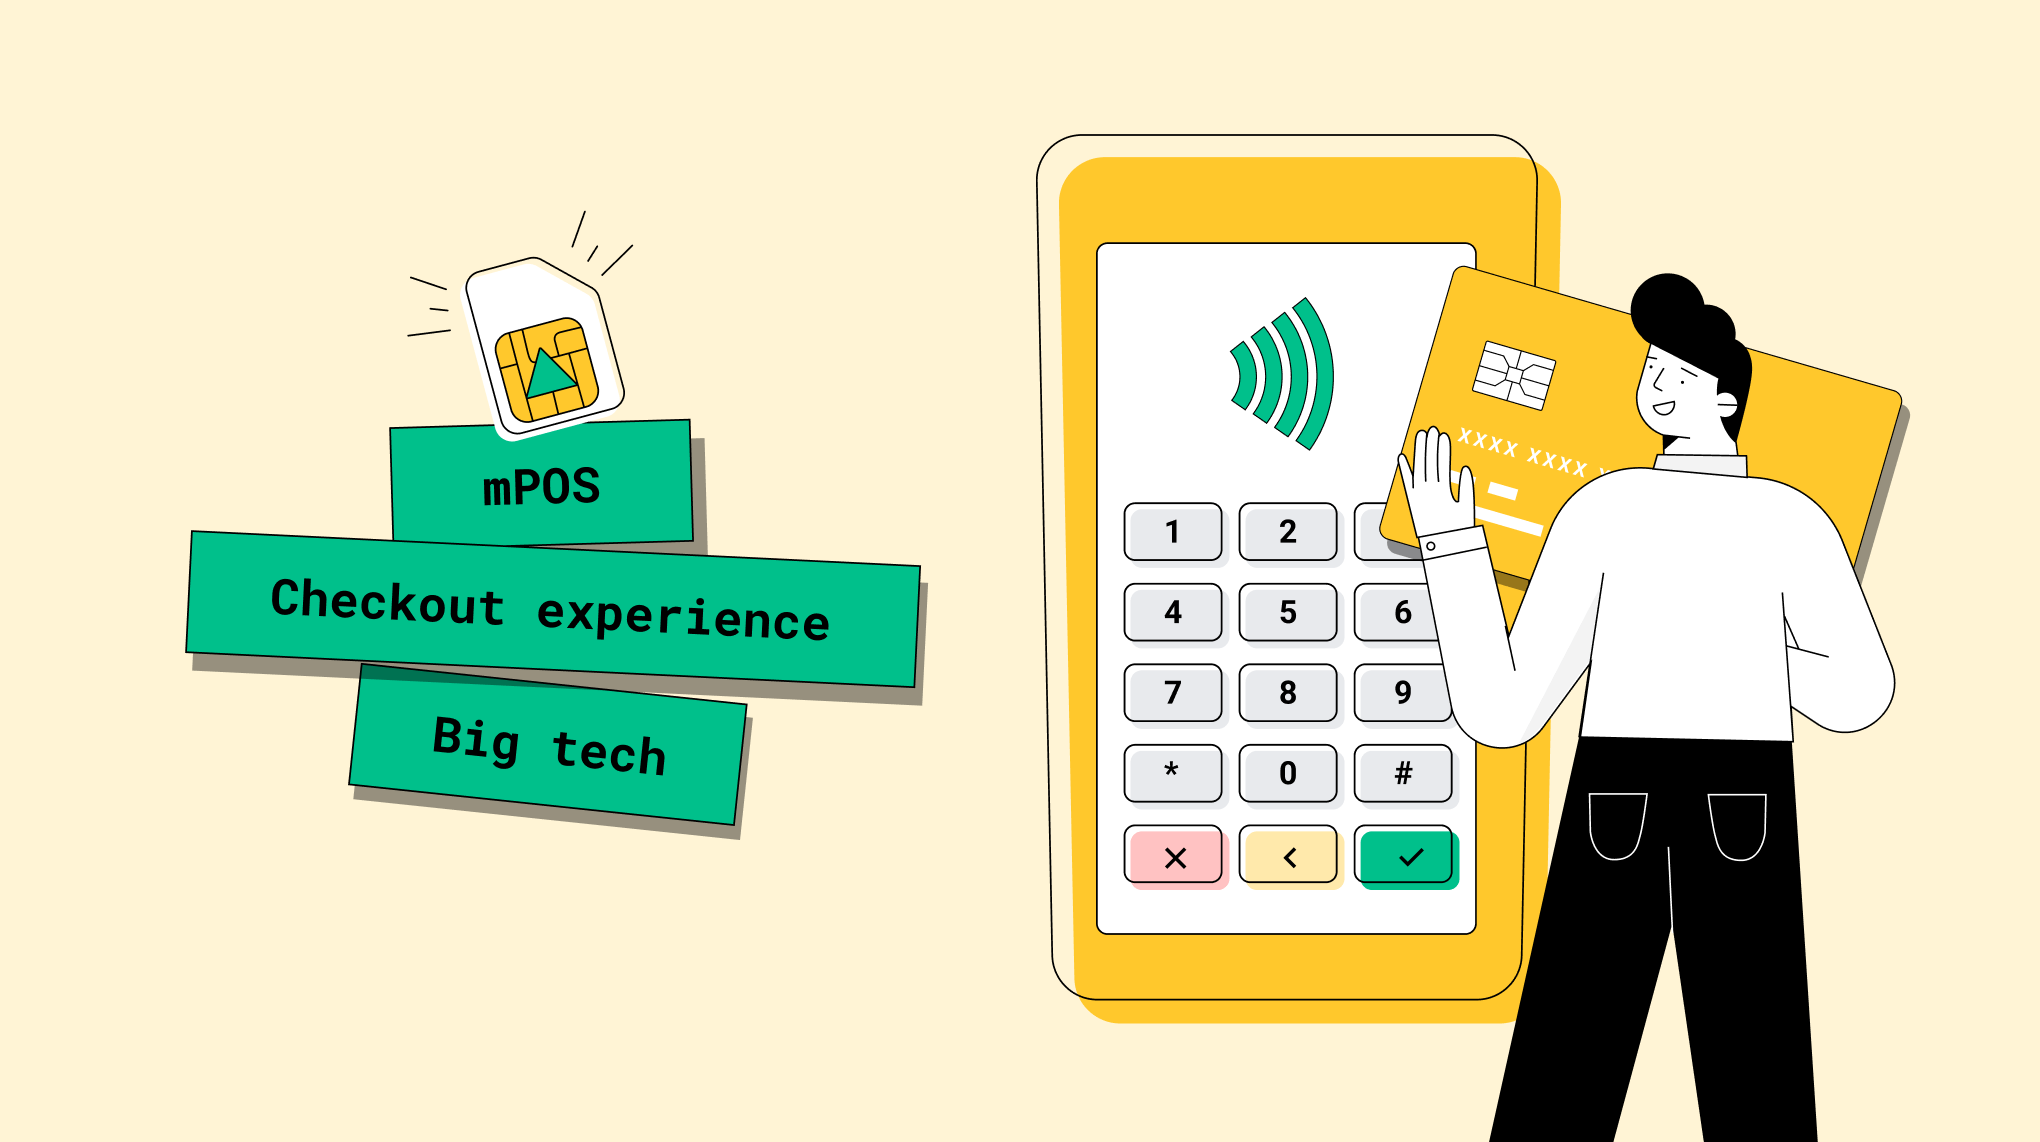 Illustration showing a person using their payment card in a point of sale device